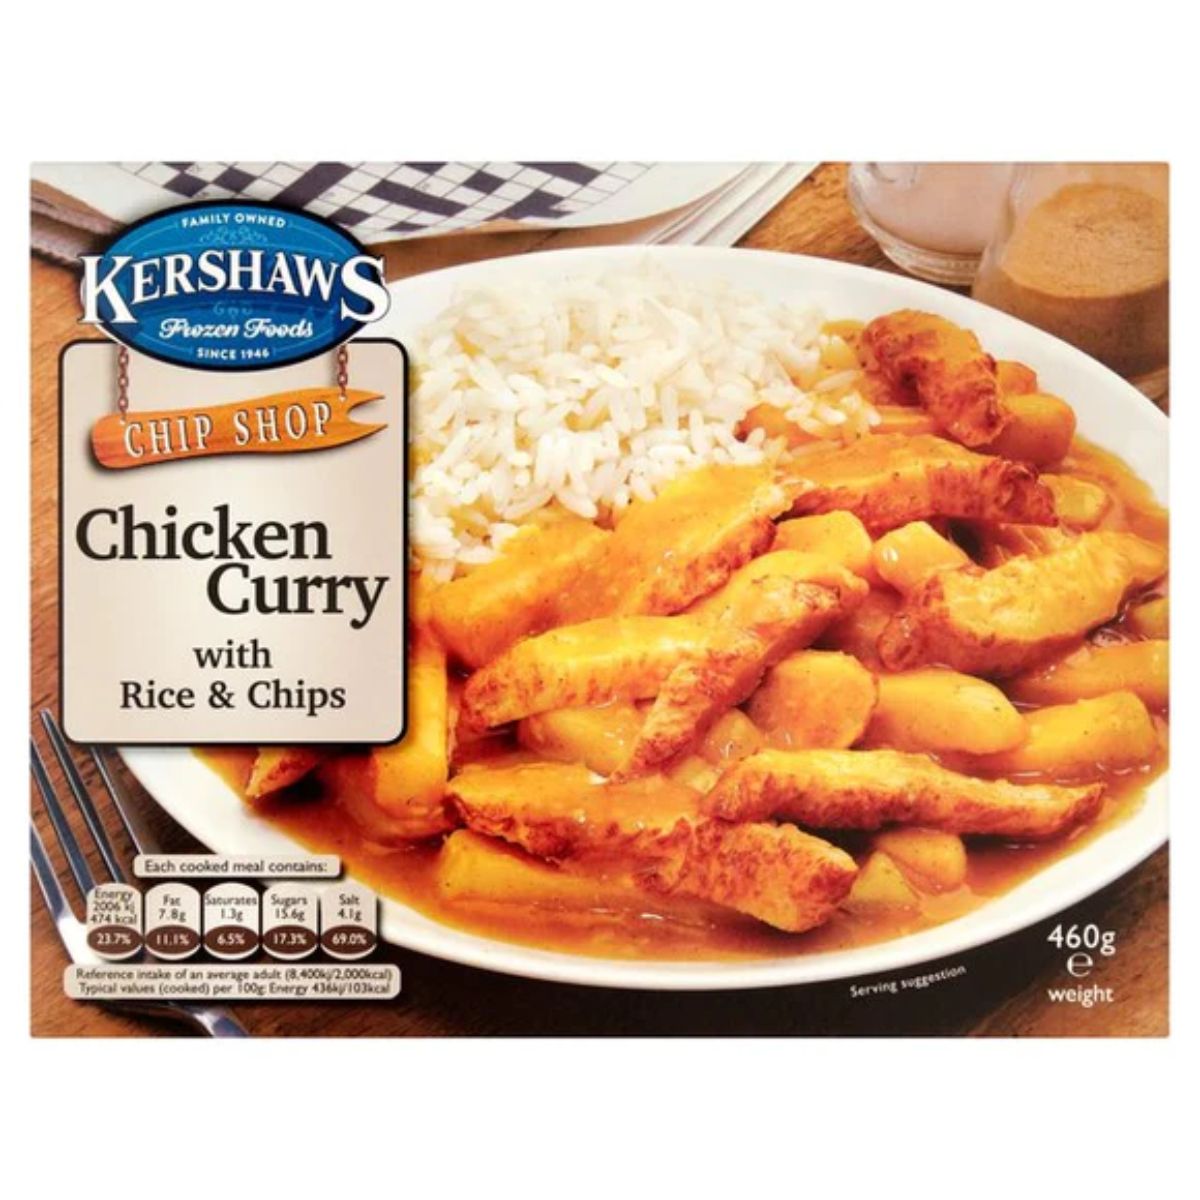 Kershaws - Chip Shop Chicken Curry with Rice & Chips - 460g chicken curry with rice and chips.